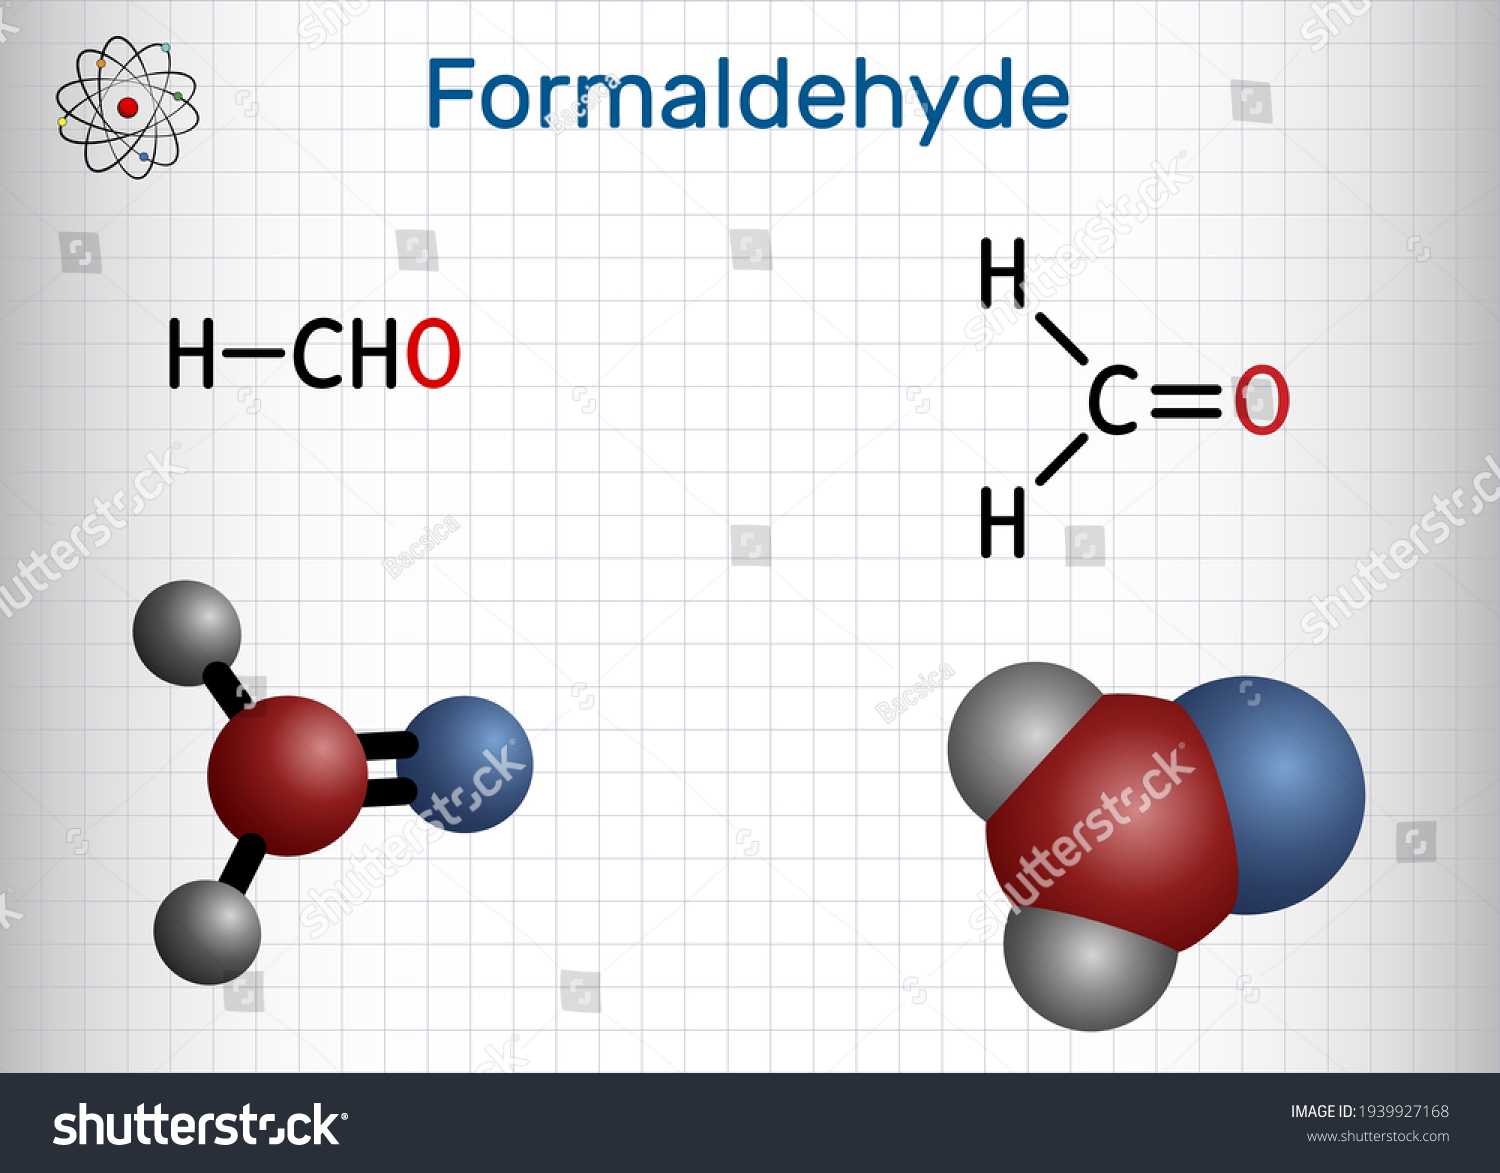 SVG of Formaldehyde, methanol, methylene oxide, methylaldehyde, oxomethane molecule. It is simplest of aldehydes, aqueous solution is formalin. Sheet of paper in a cage. Vector illustration svg